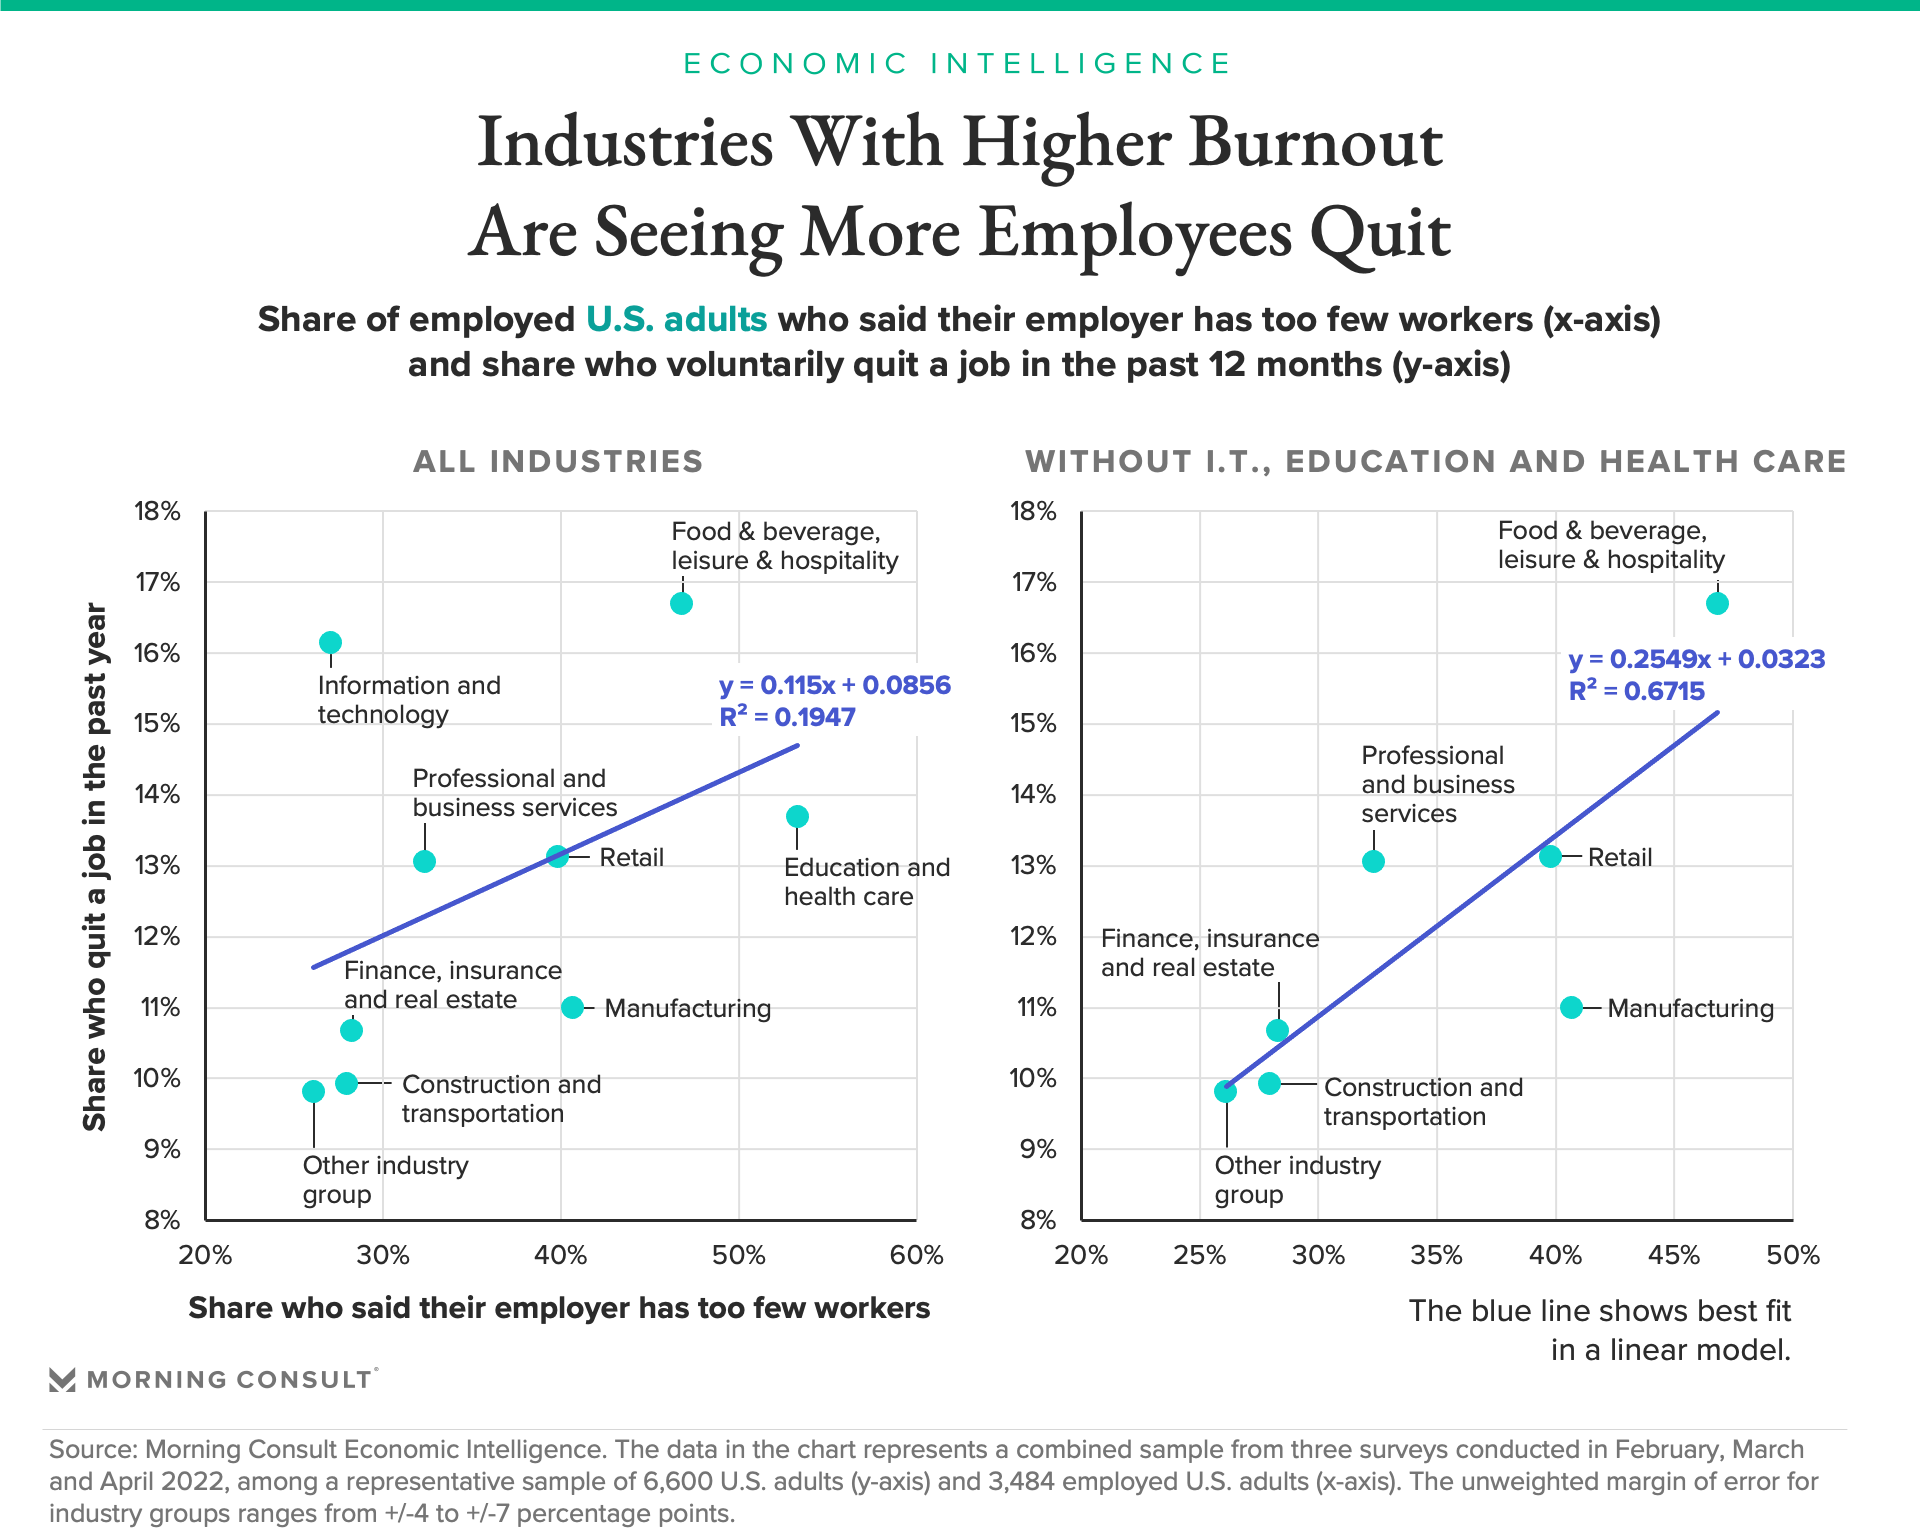 Correlation between burn out and quit rates